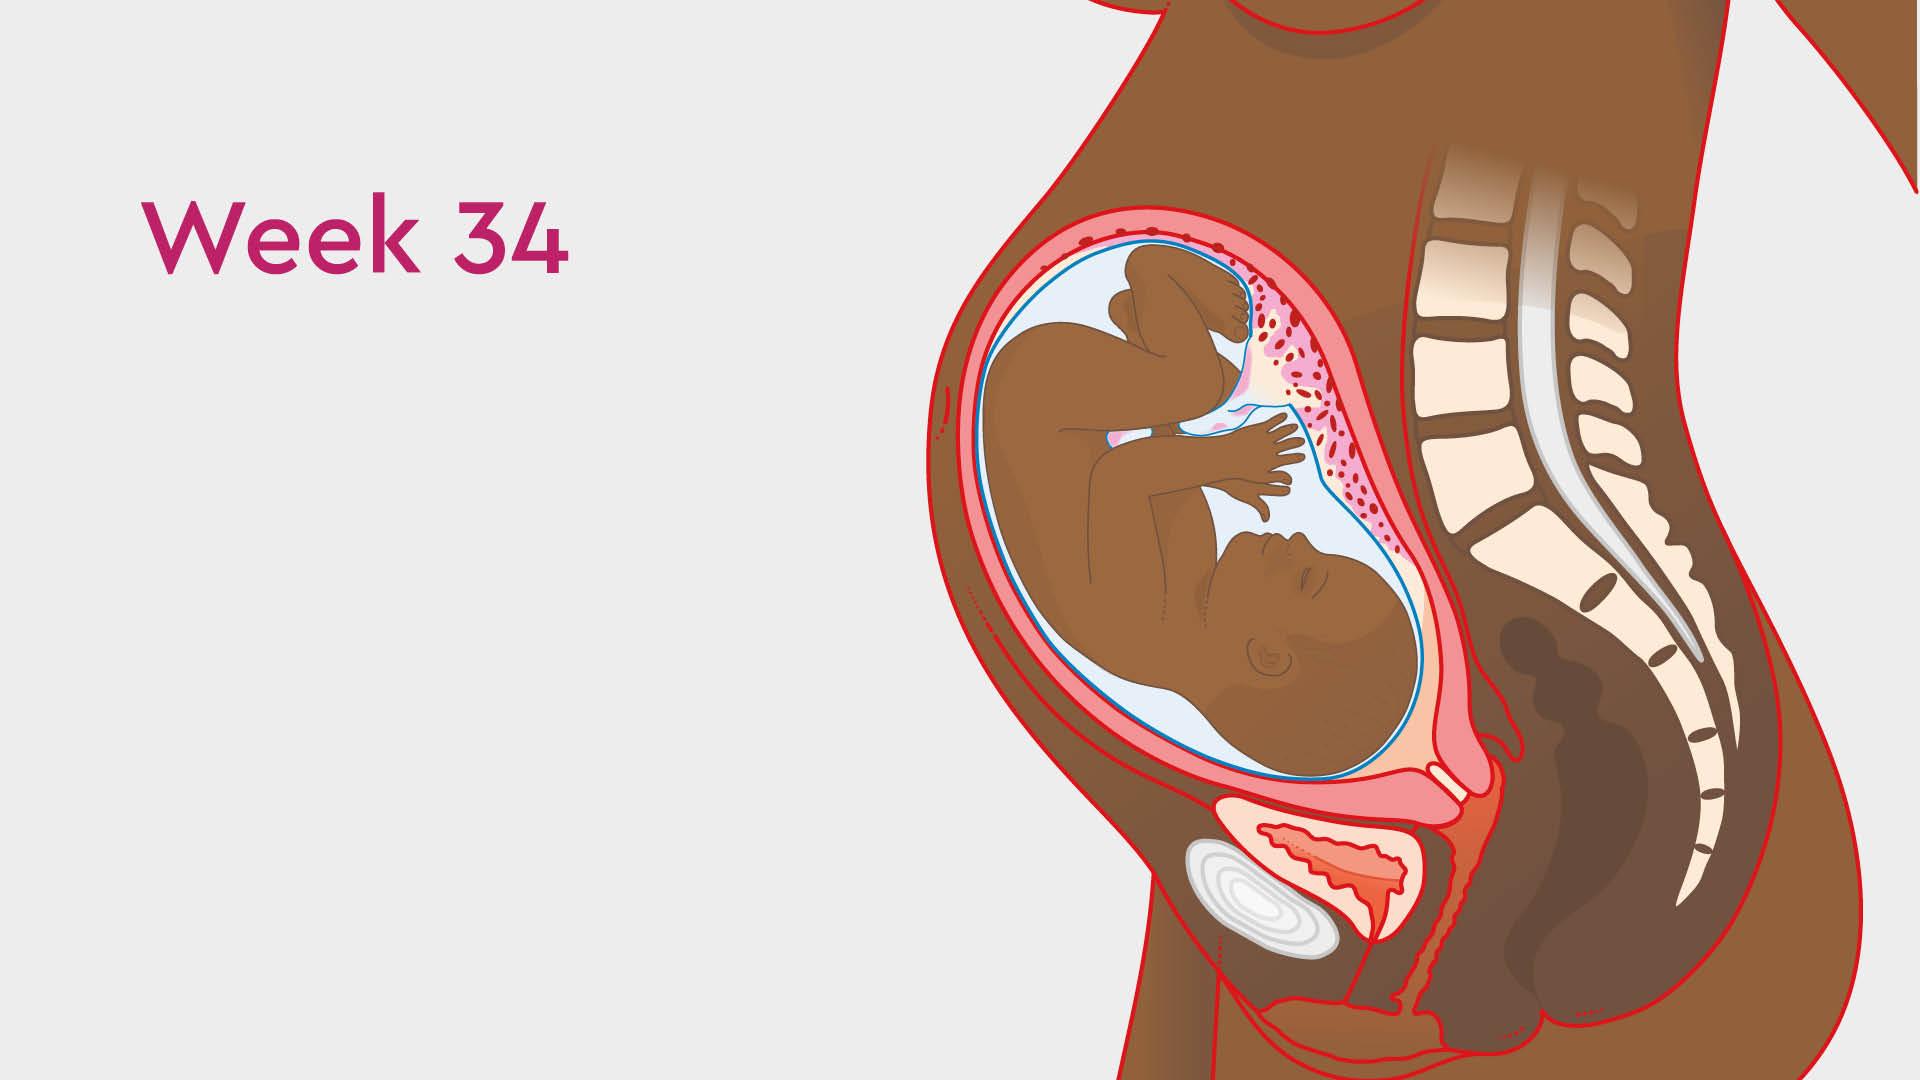 34 Weeks Pregnant: Nesting, Pelvic Pain & Other Symptoms